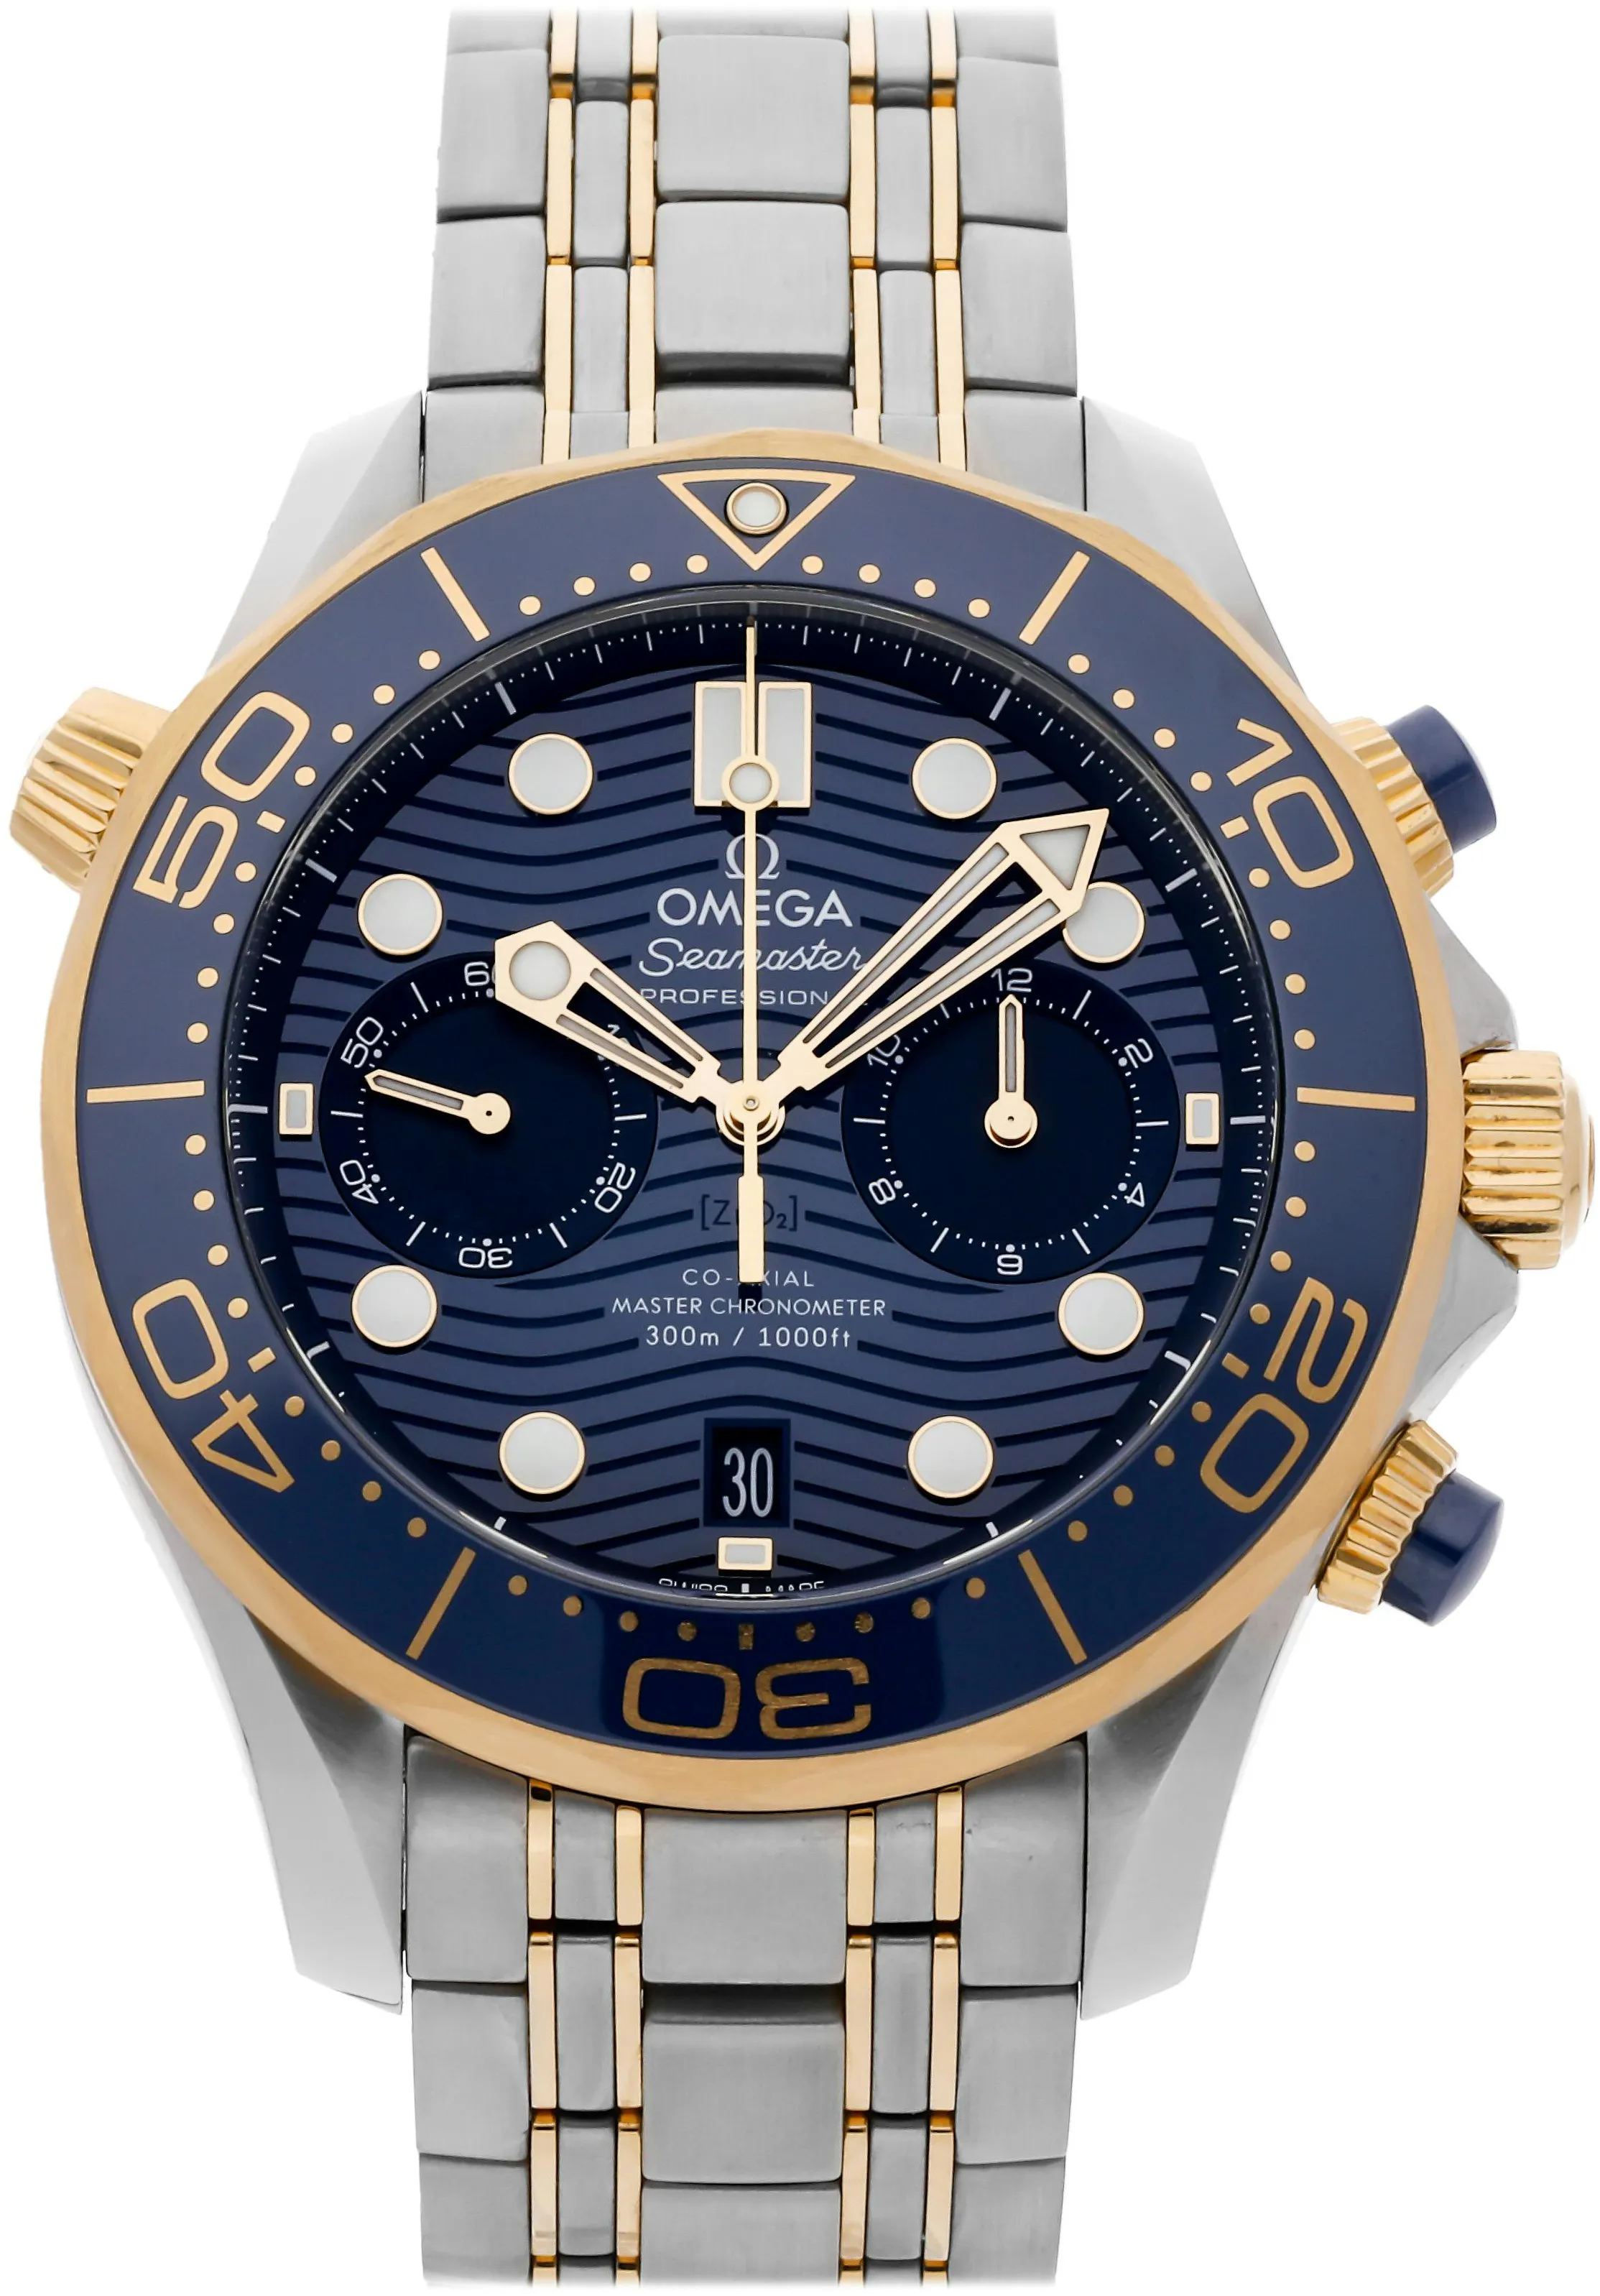 Omega Seamaster Diver 300M 210.20.44.51.03.001 44mm Stainless steel Blue